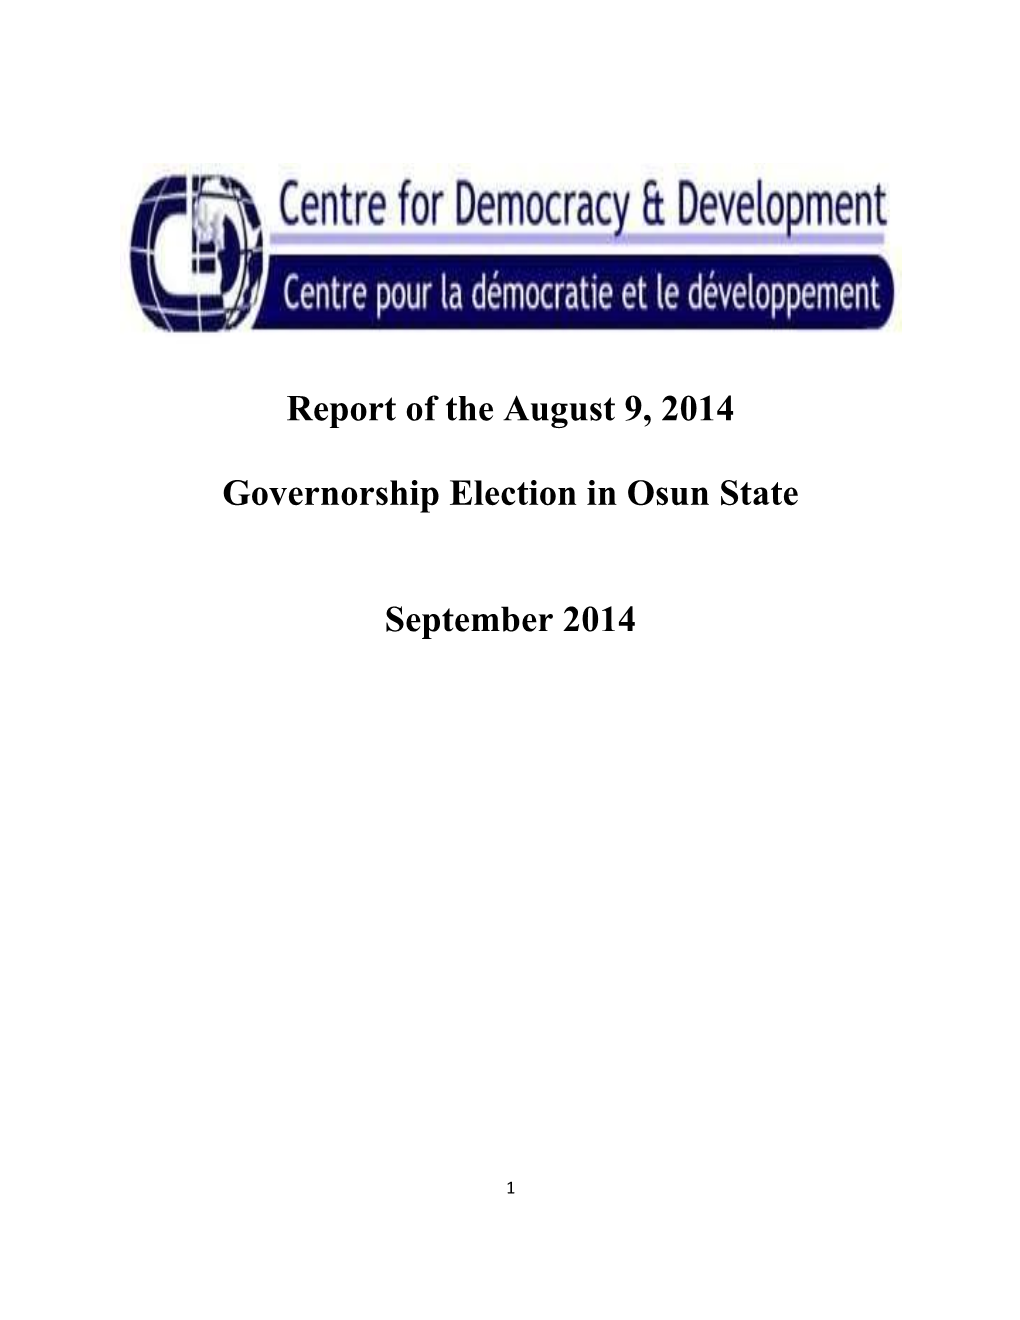 Report of the August 9, 2014 Governorship Election in Osun